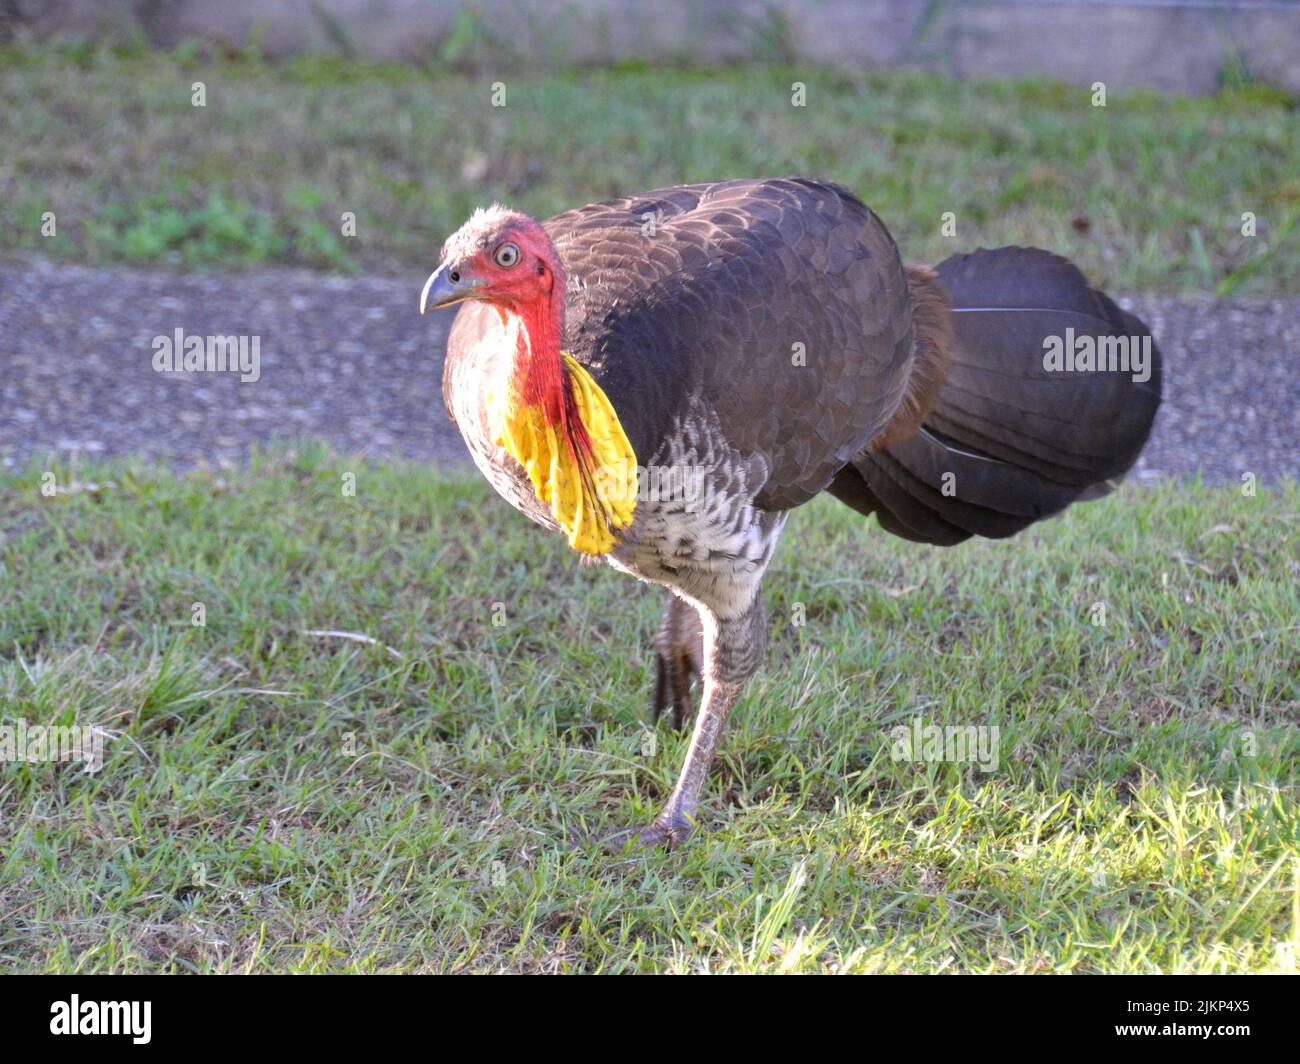 One make bush turkey with vivid red and yellow coloring on its head and neck in Noosa, Australia. Stock Photo